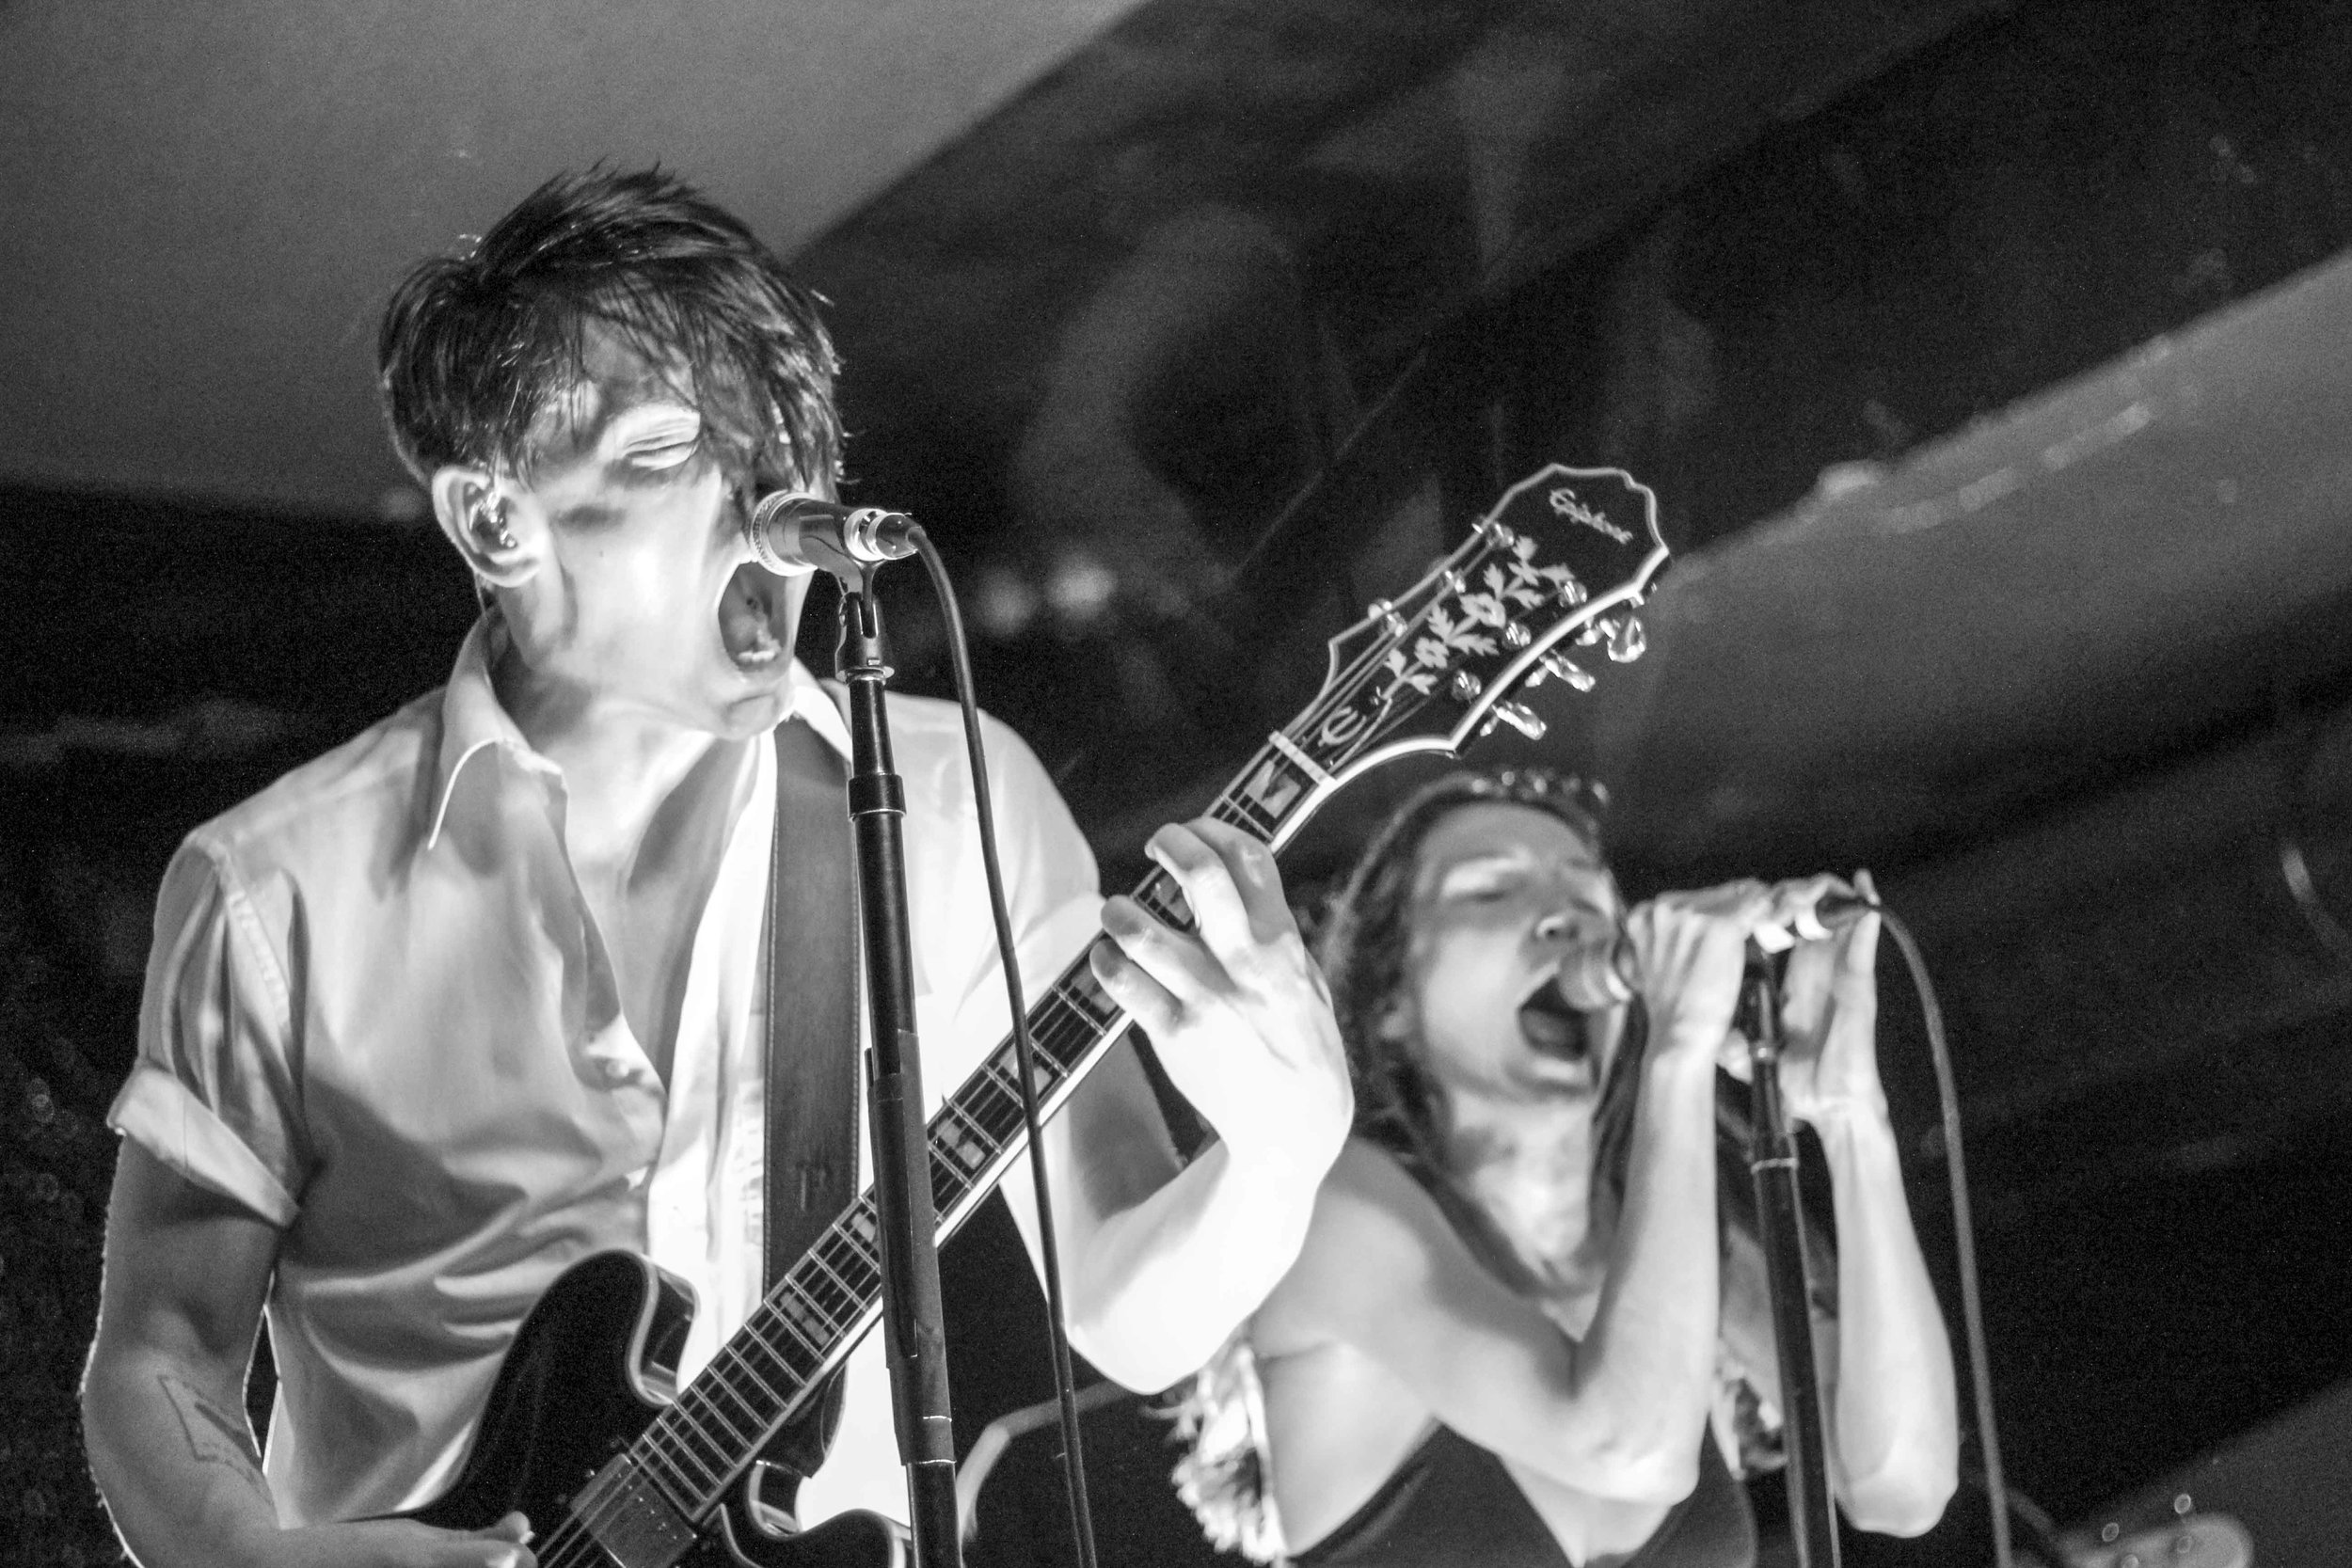 July Talk at Bottom of the Hill